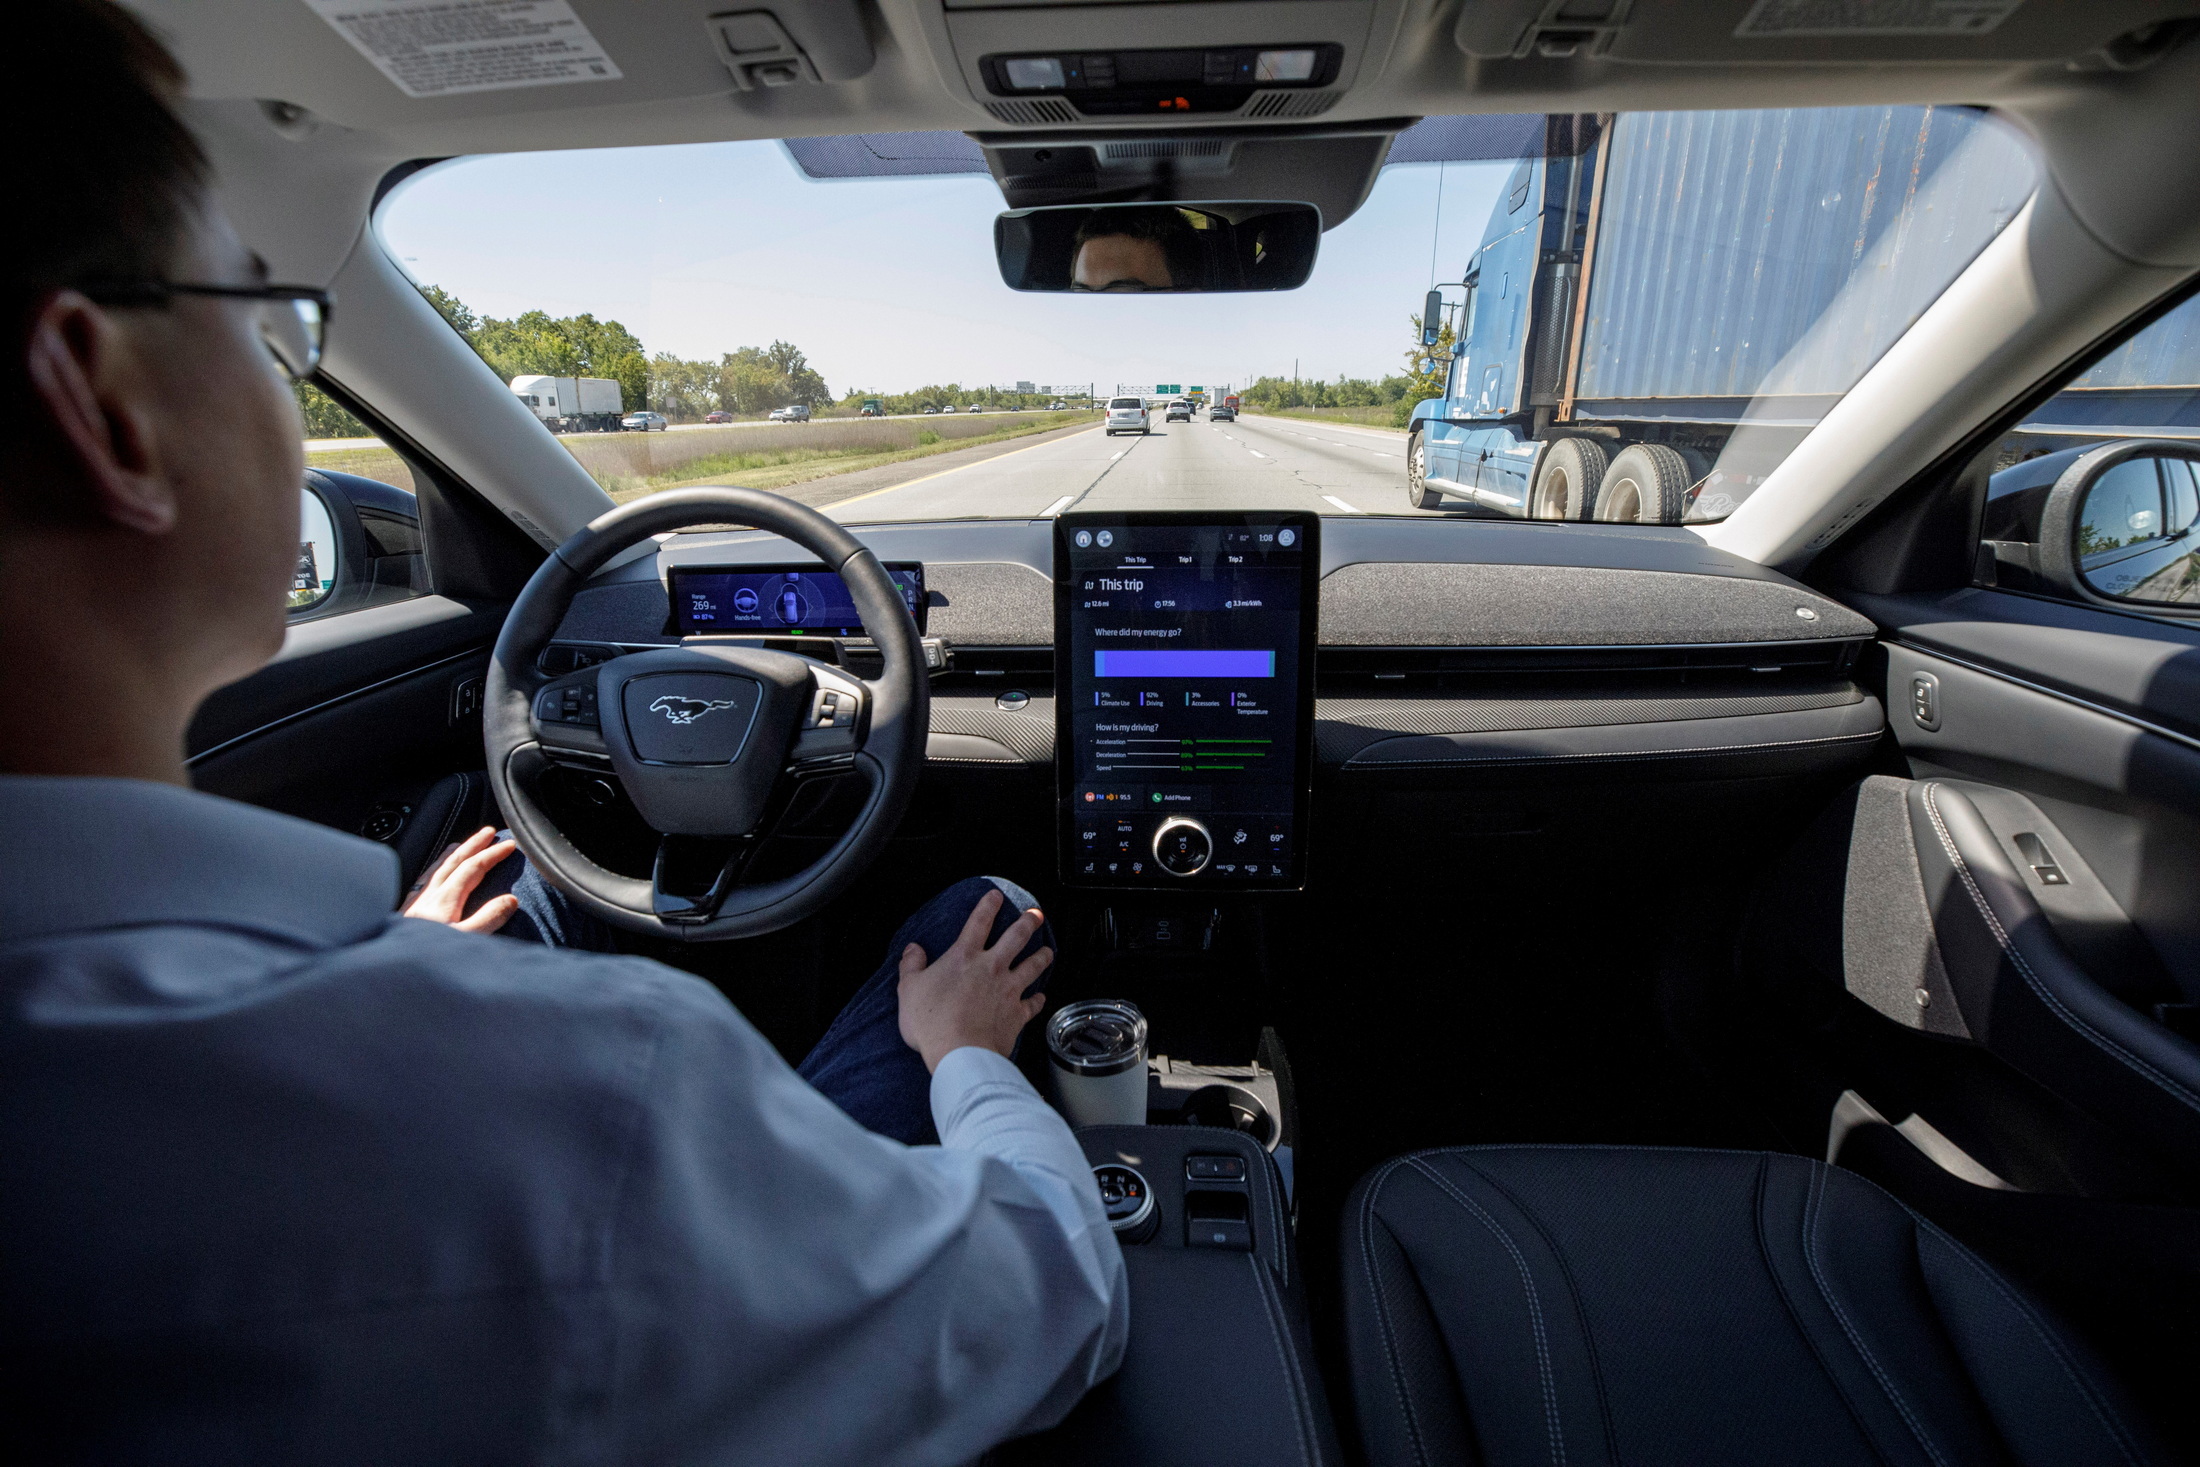 Breaking News: Ford's High-Tech Driving System in Spotlight After Tragic Texas Highway Accident